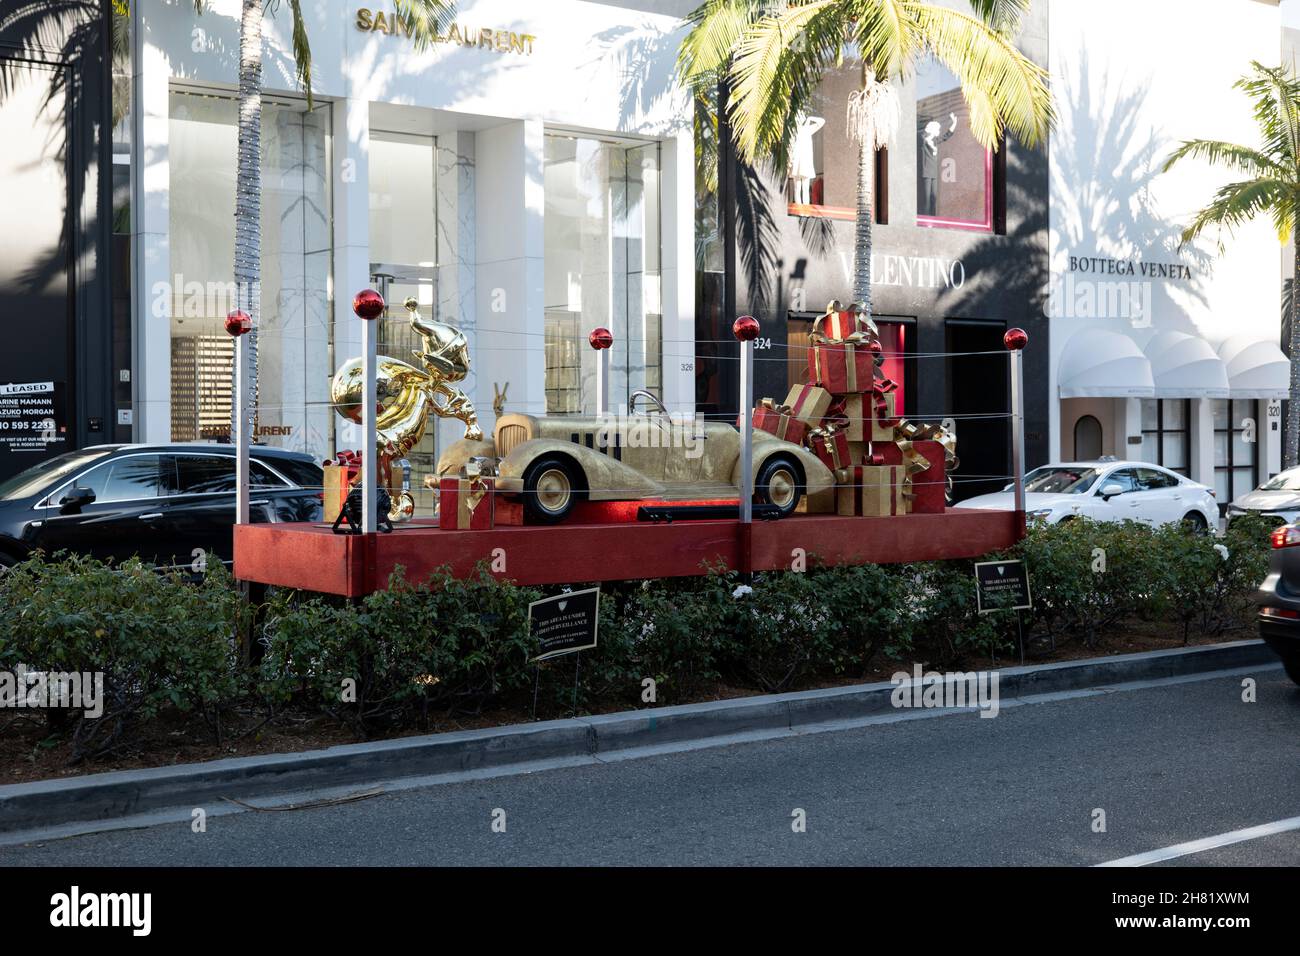 Beverly Hills, CA USA - November 25, 2021: Santas Elves and elaborate Christmas decorations on Rodeo Drive in front of the Saint Laurent and Valentino Stock Photo